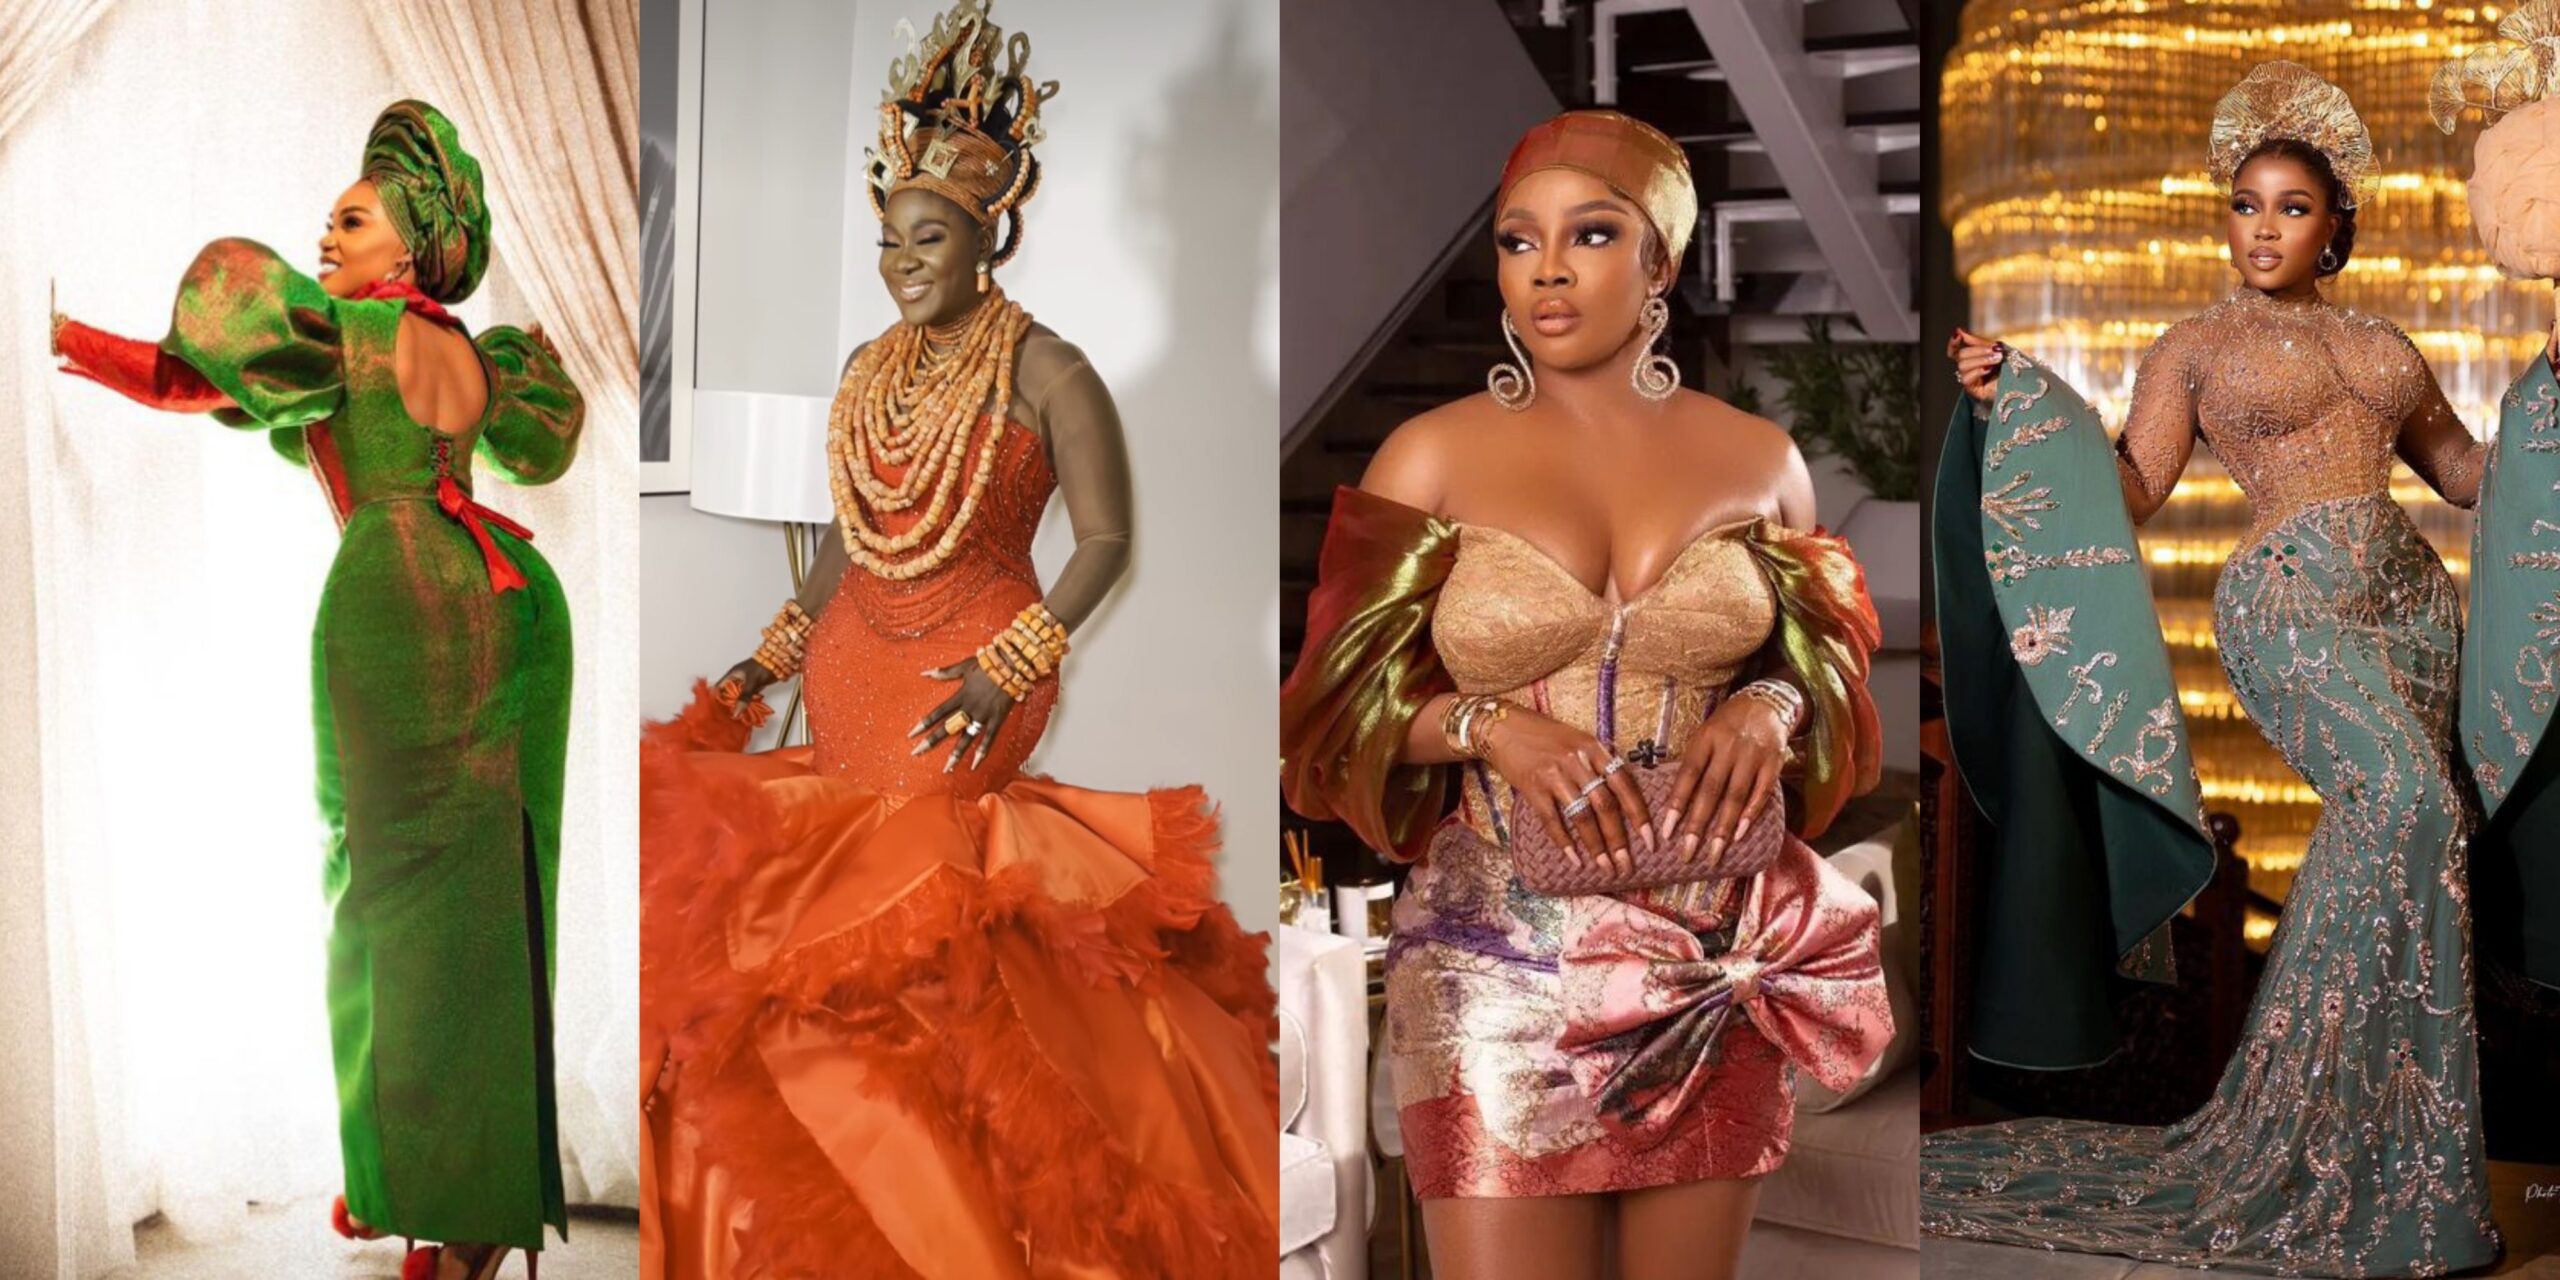 Mercy Johnson, Iyabo Ojo, Toke Makinwa, others turn heads in their cultural outfits at Battle on Buka Streets movie premiere –